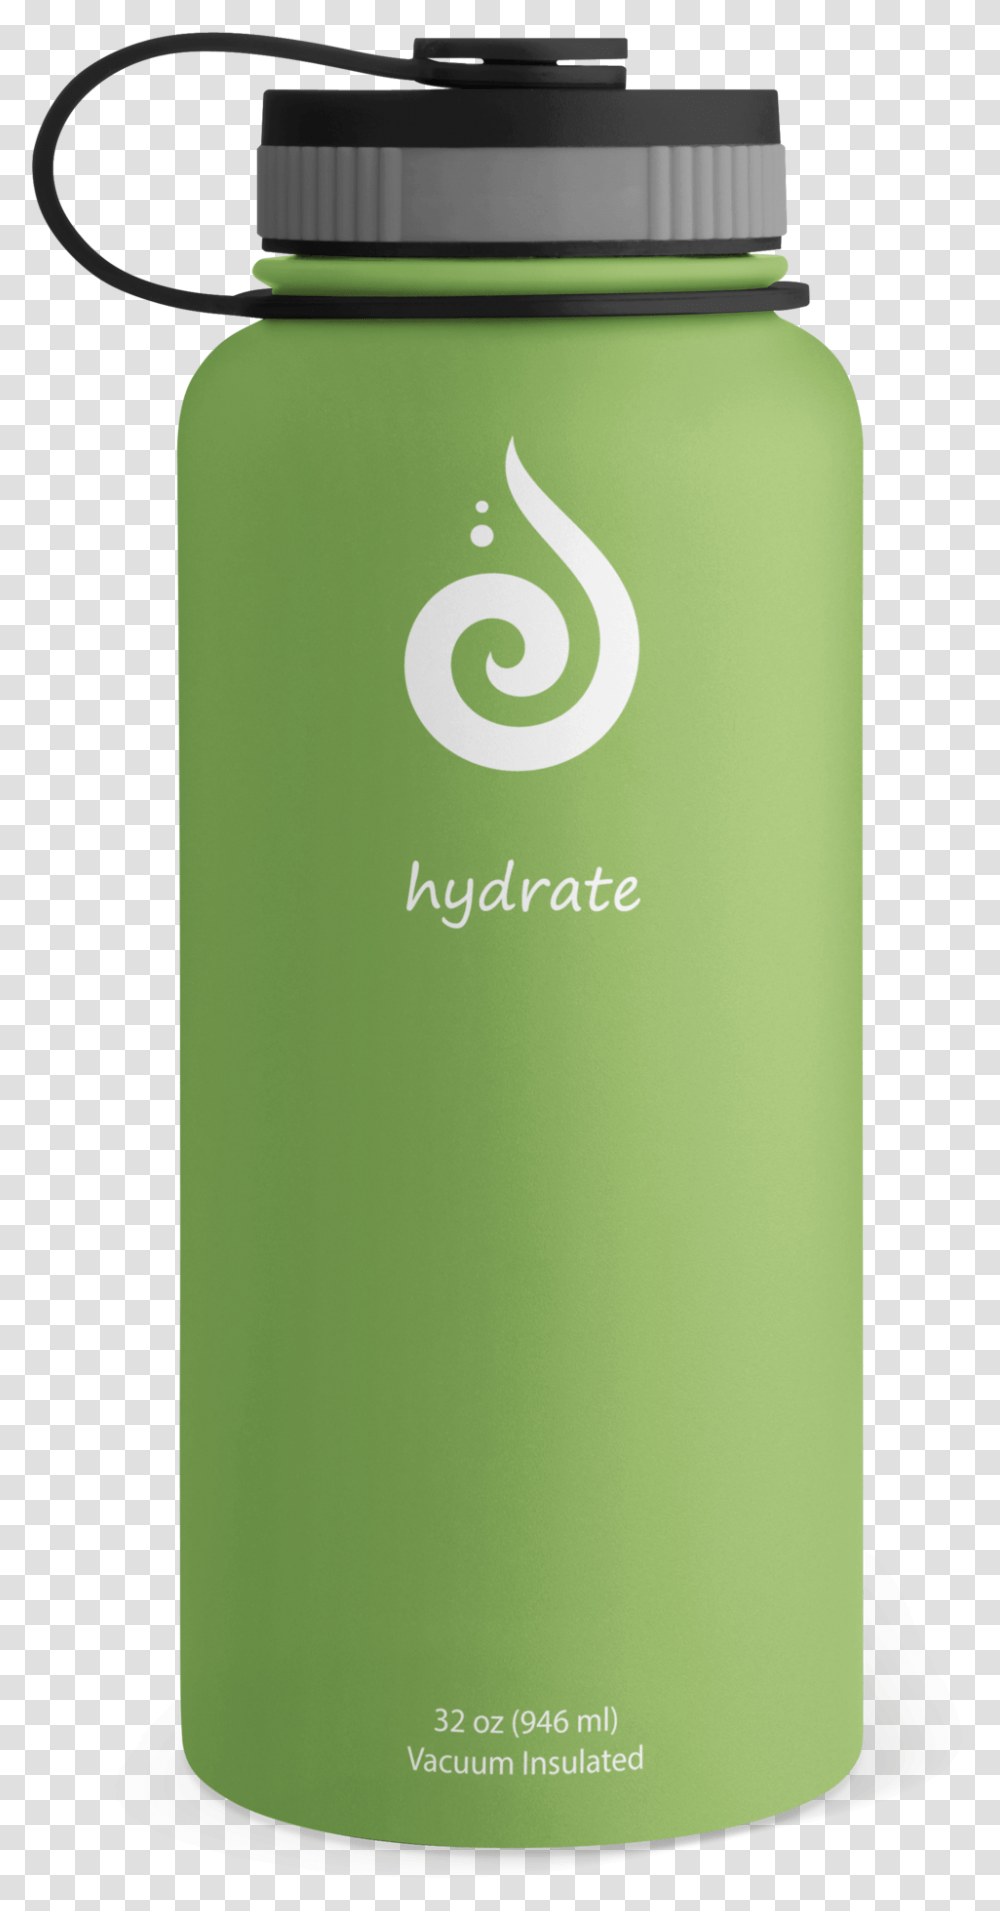 Hydrate 32oz Water Bottle Kiwi - Hydrate Water Bottles Glass Bottle, Liquor, Alcohol, Beverage, Mobile Phone Transparent Png